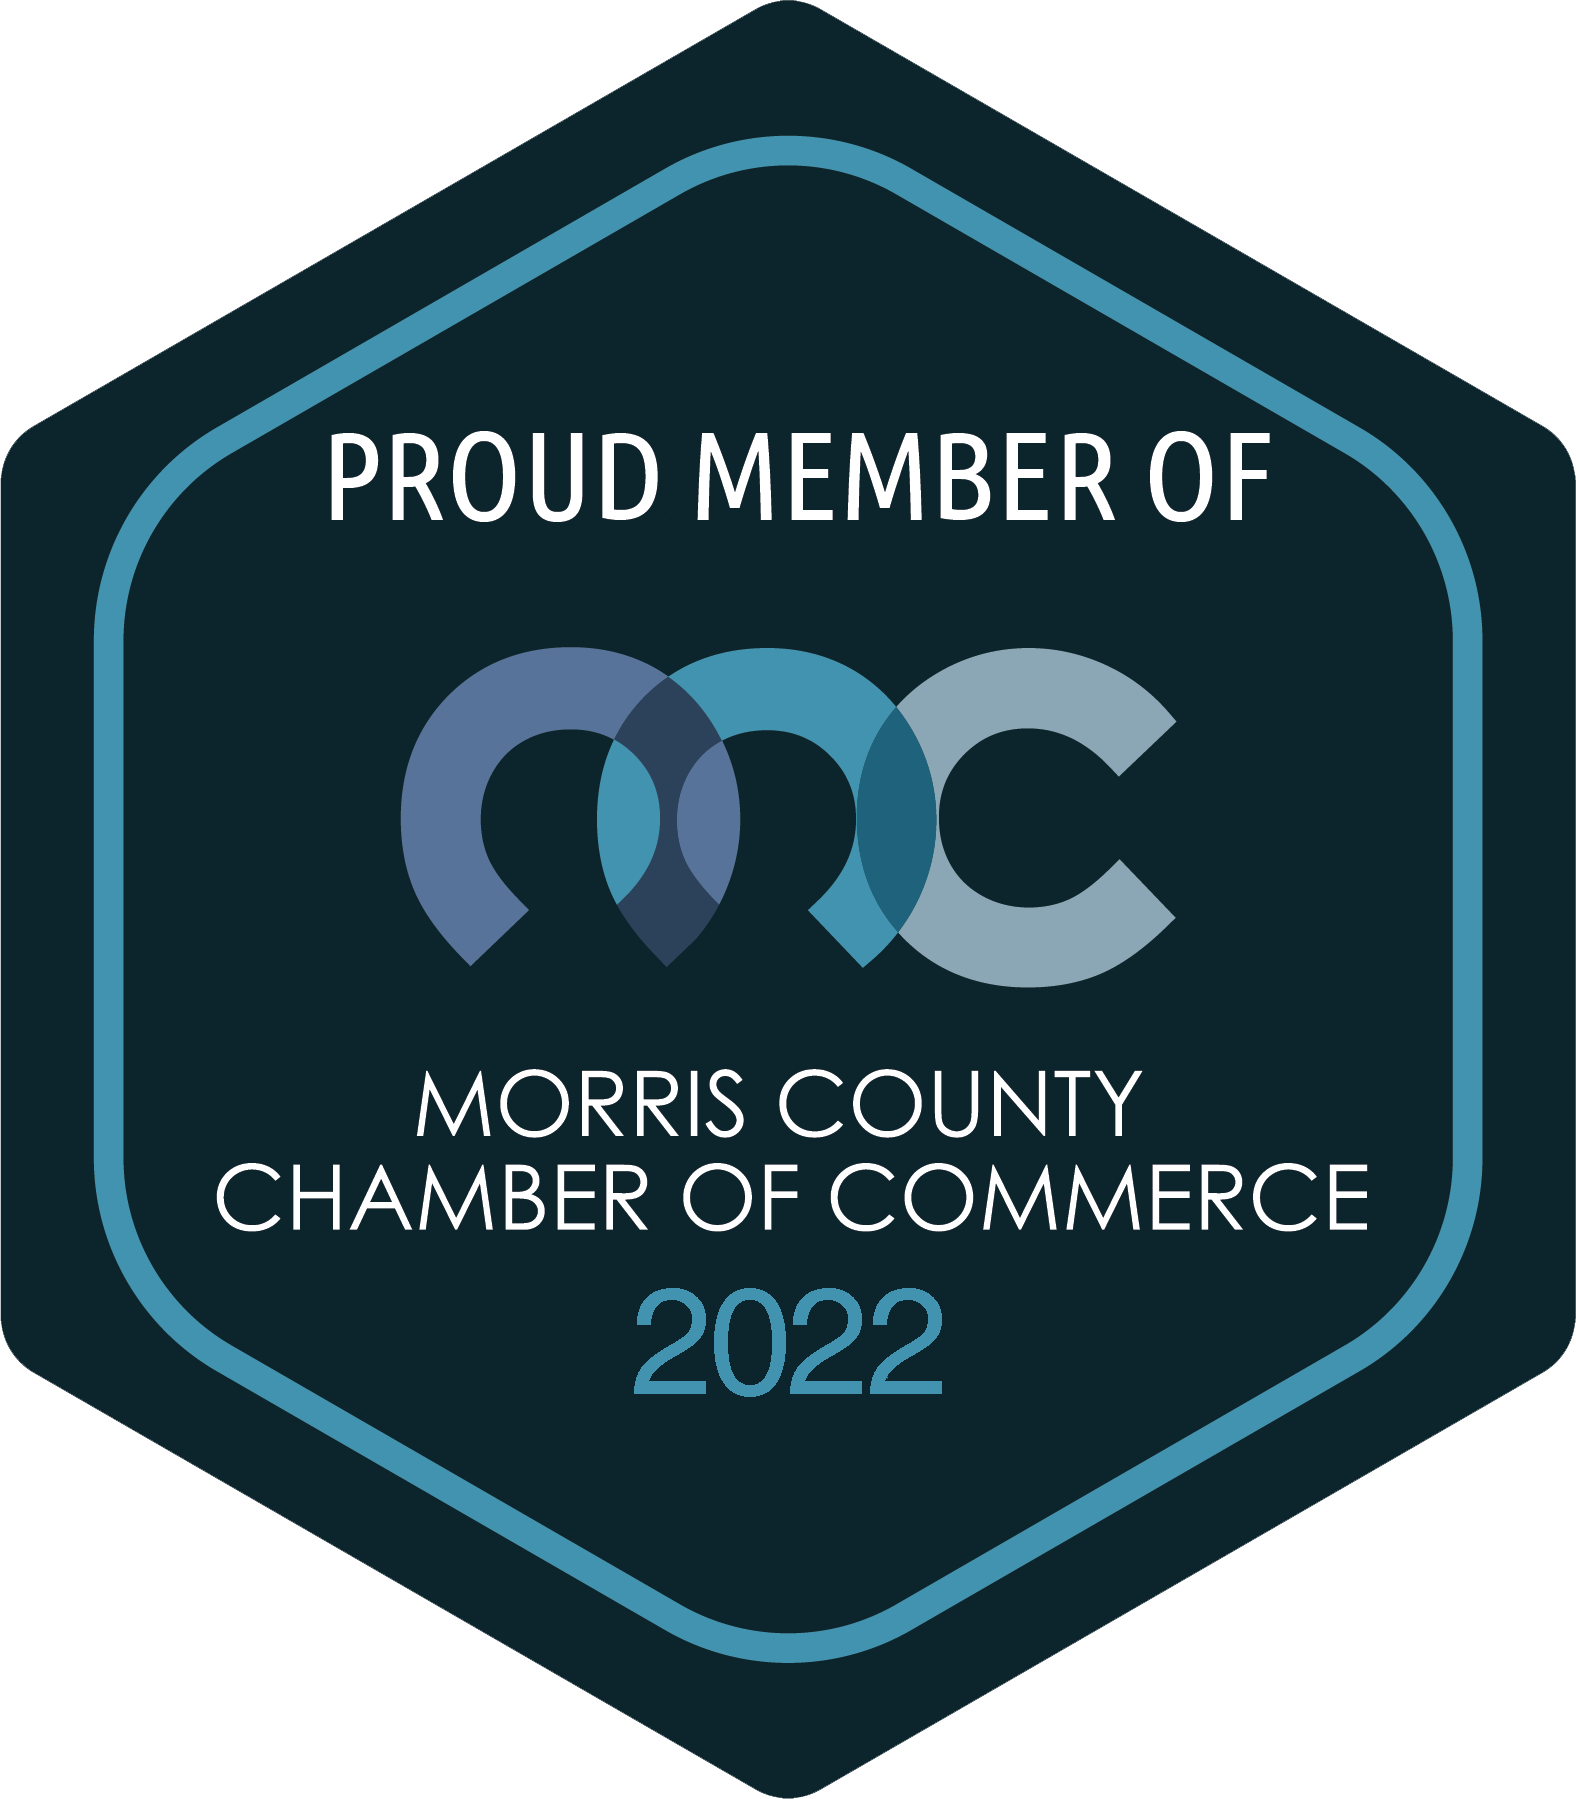 Member of the Morris County Chamber of Commerce 2022